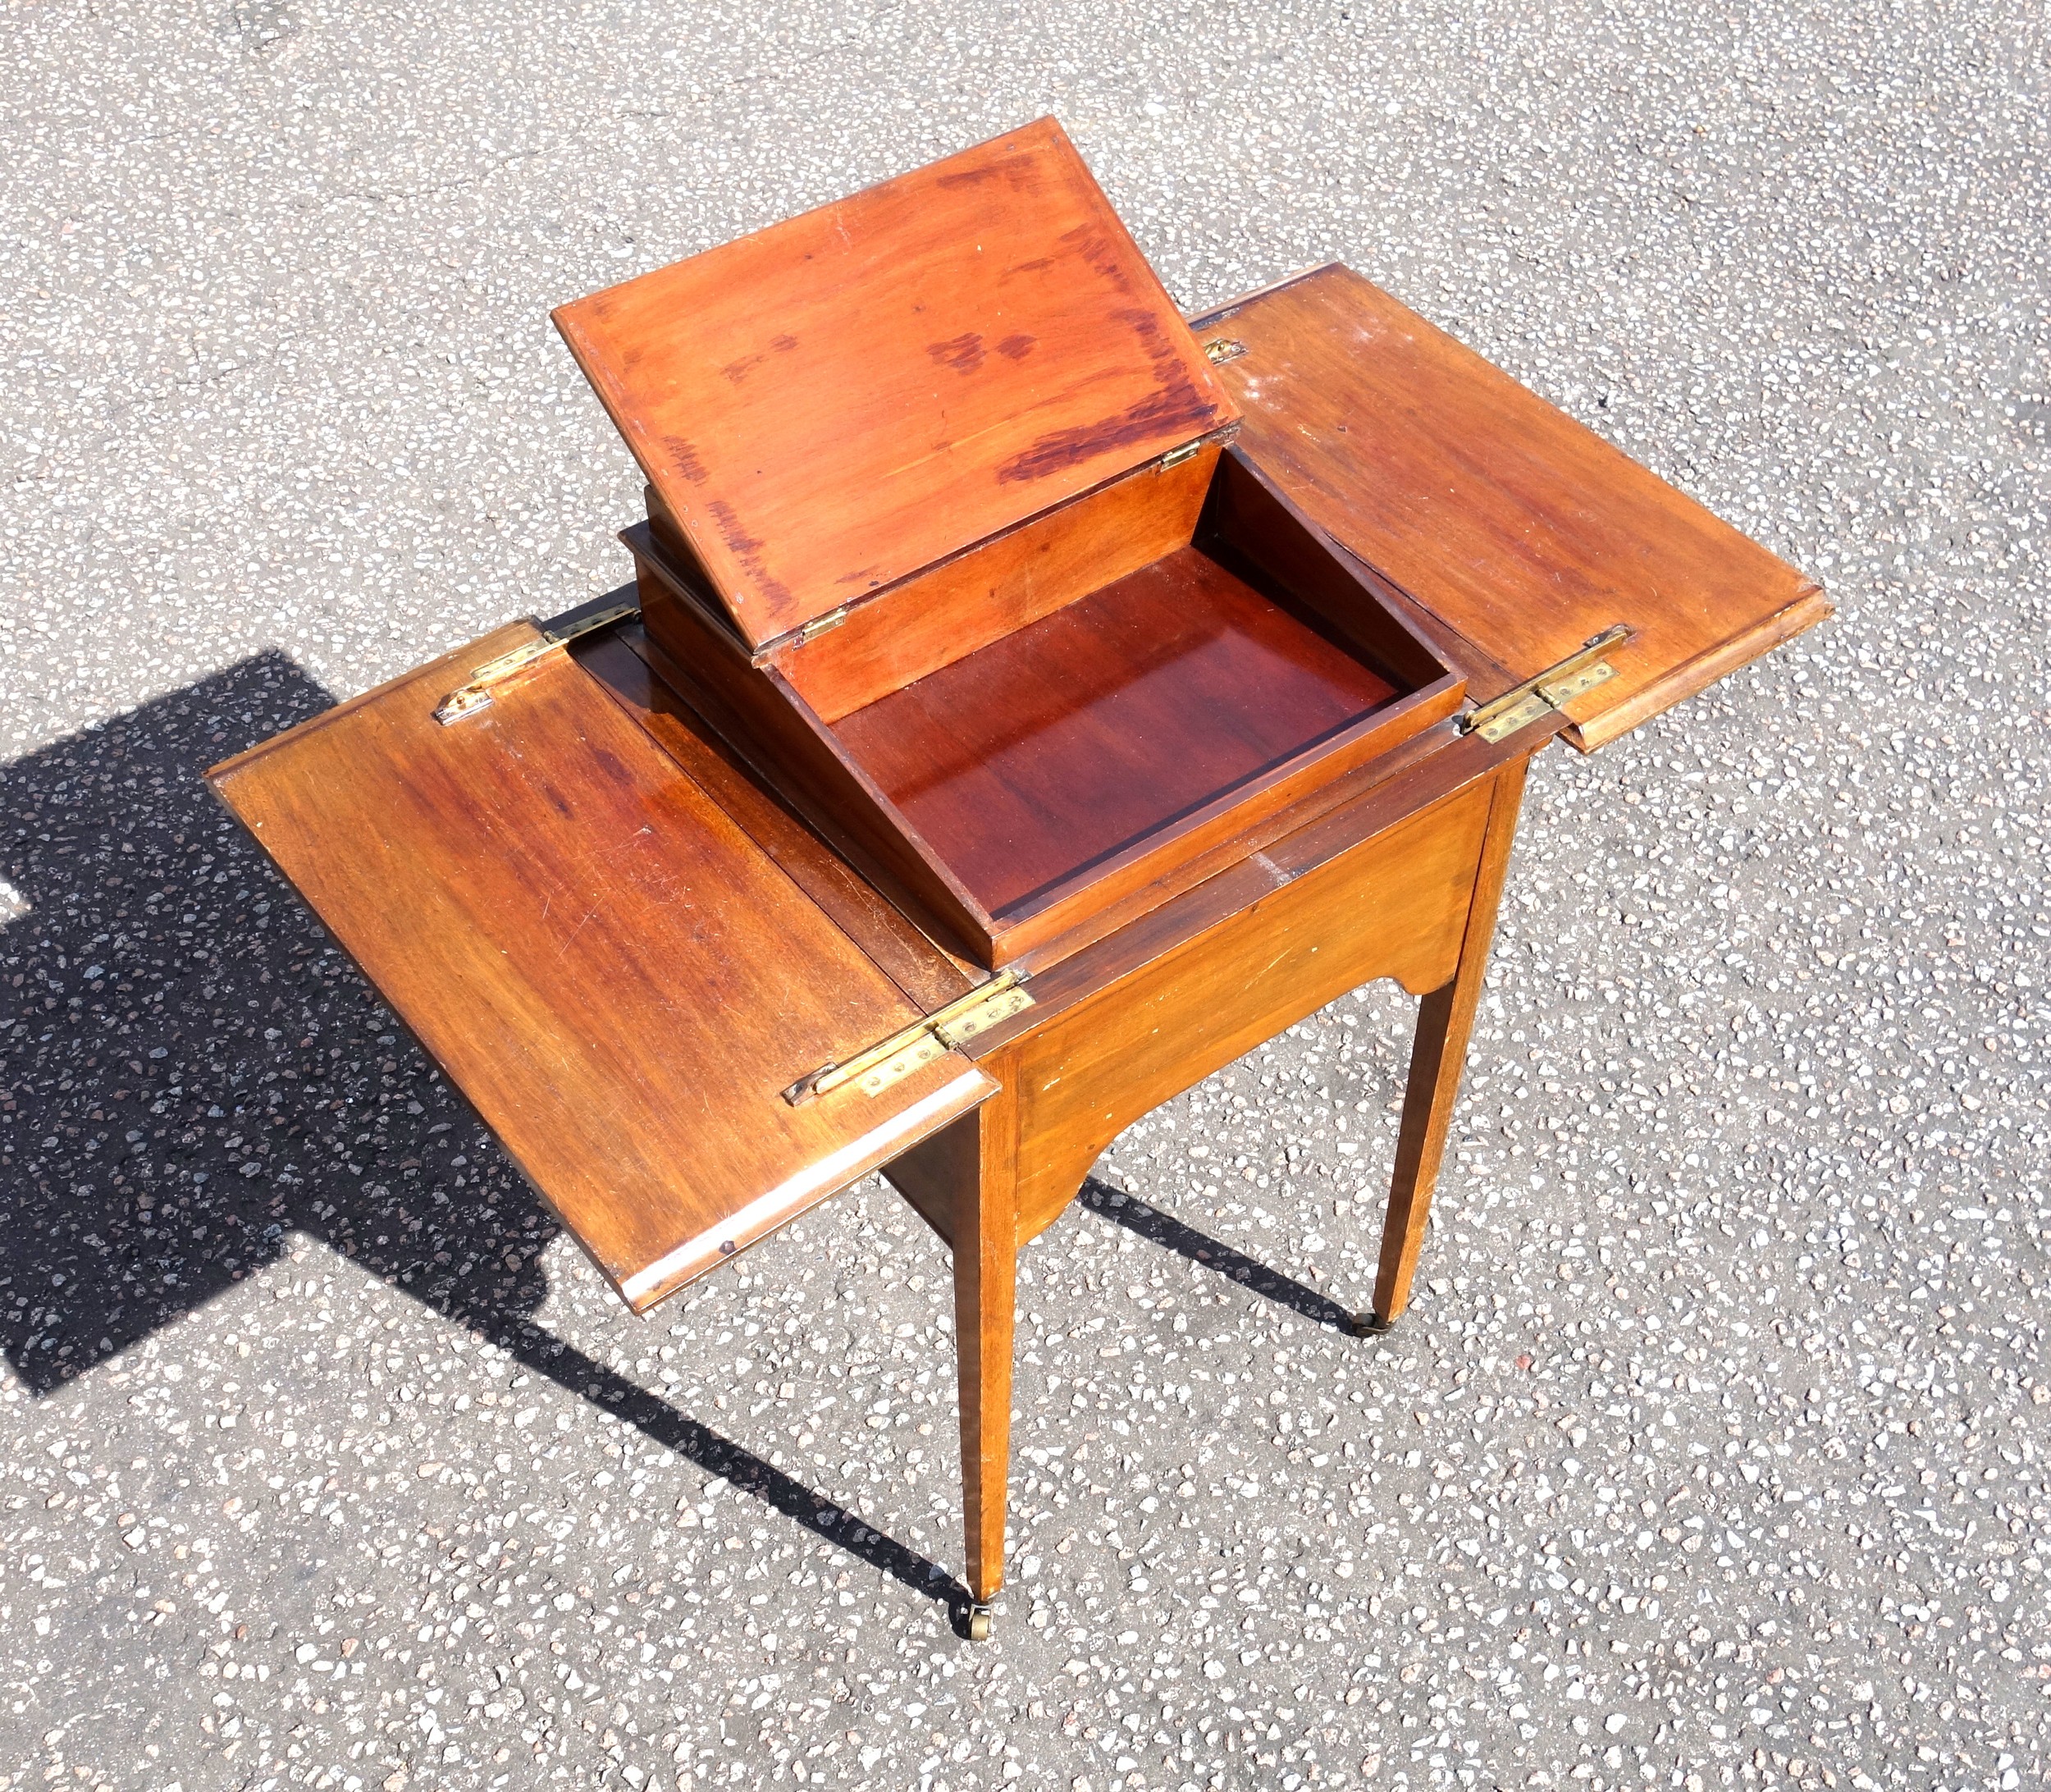 Edwardian Scottish mahogany writing table with a double hinged top raising a slope with pen tray, - Image 2 of 7